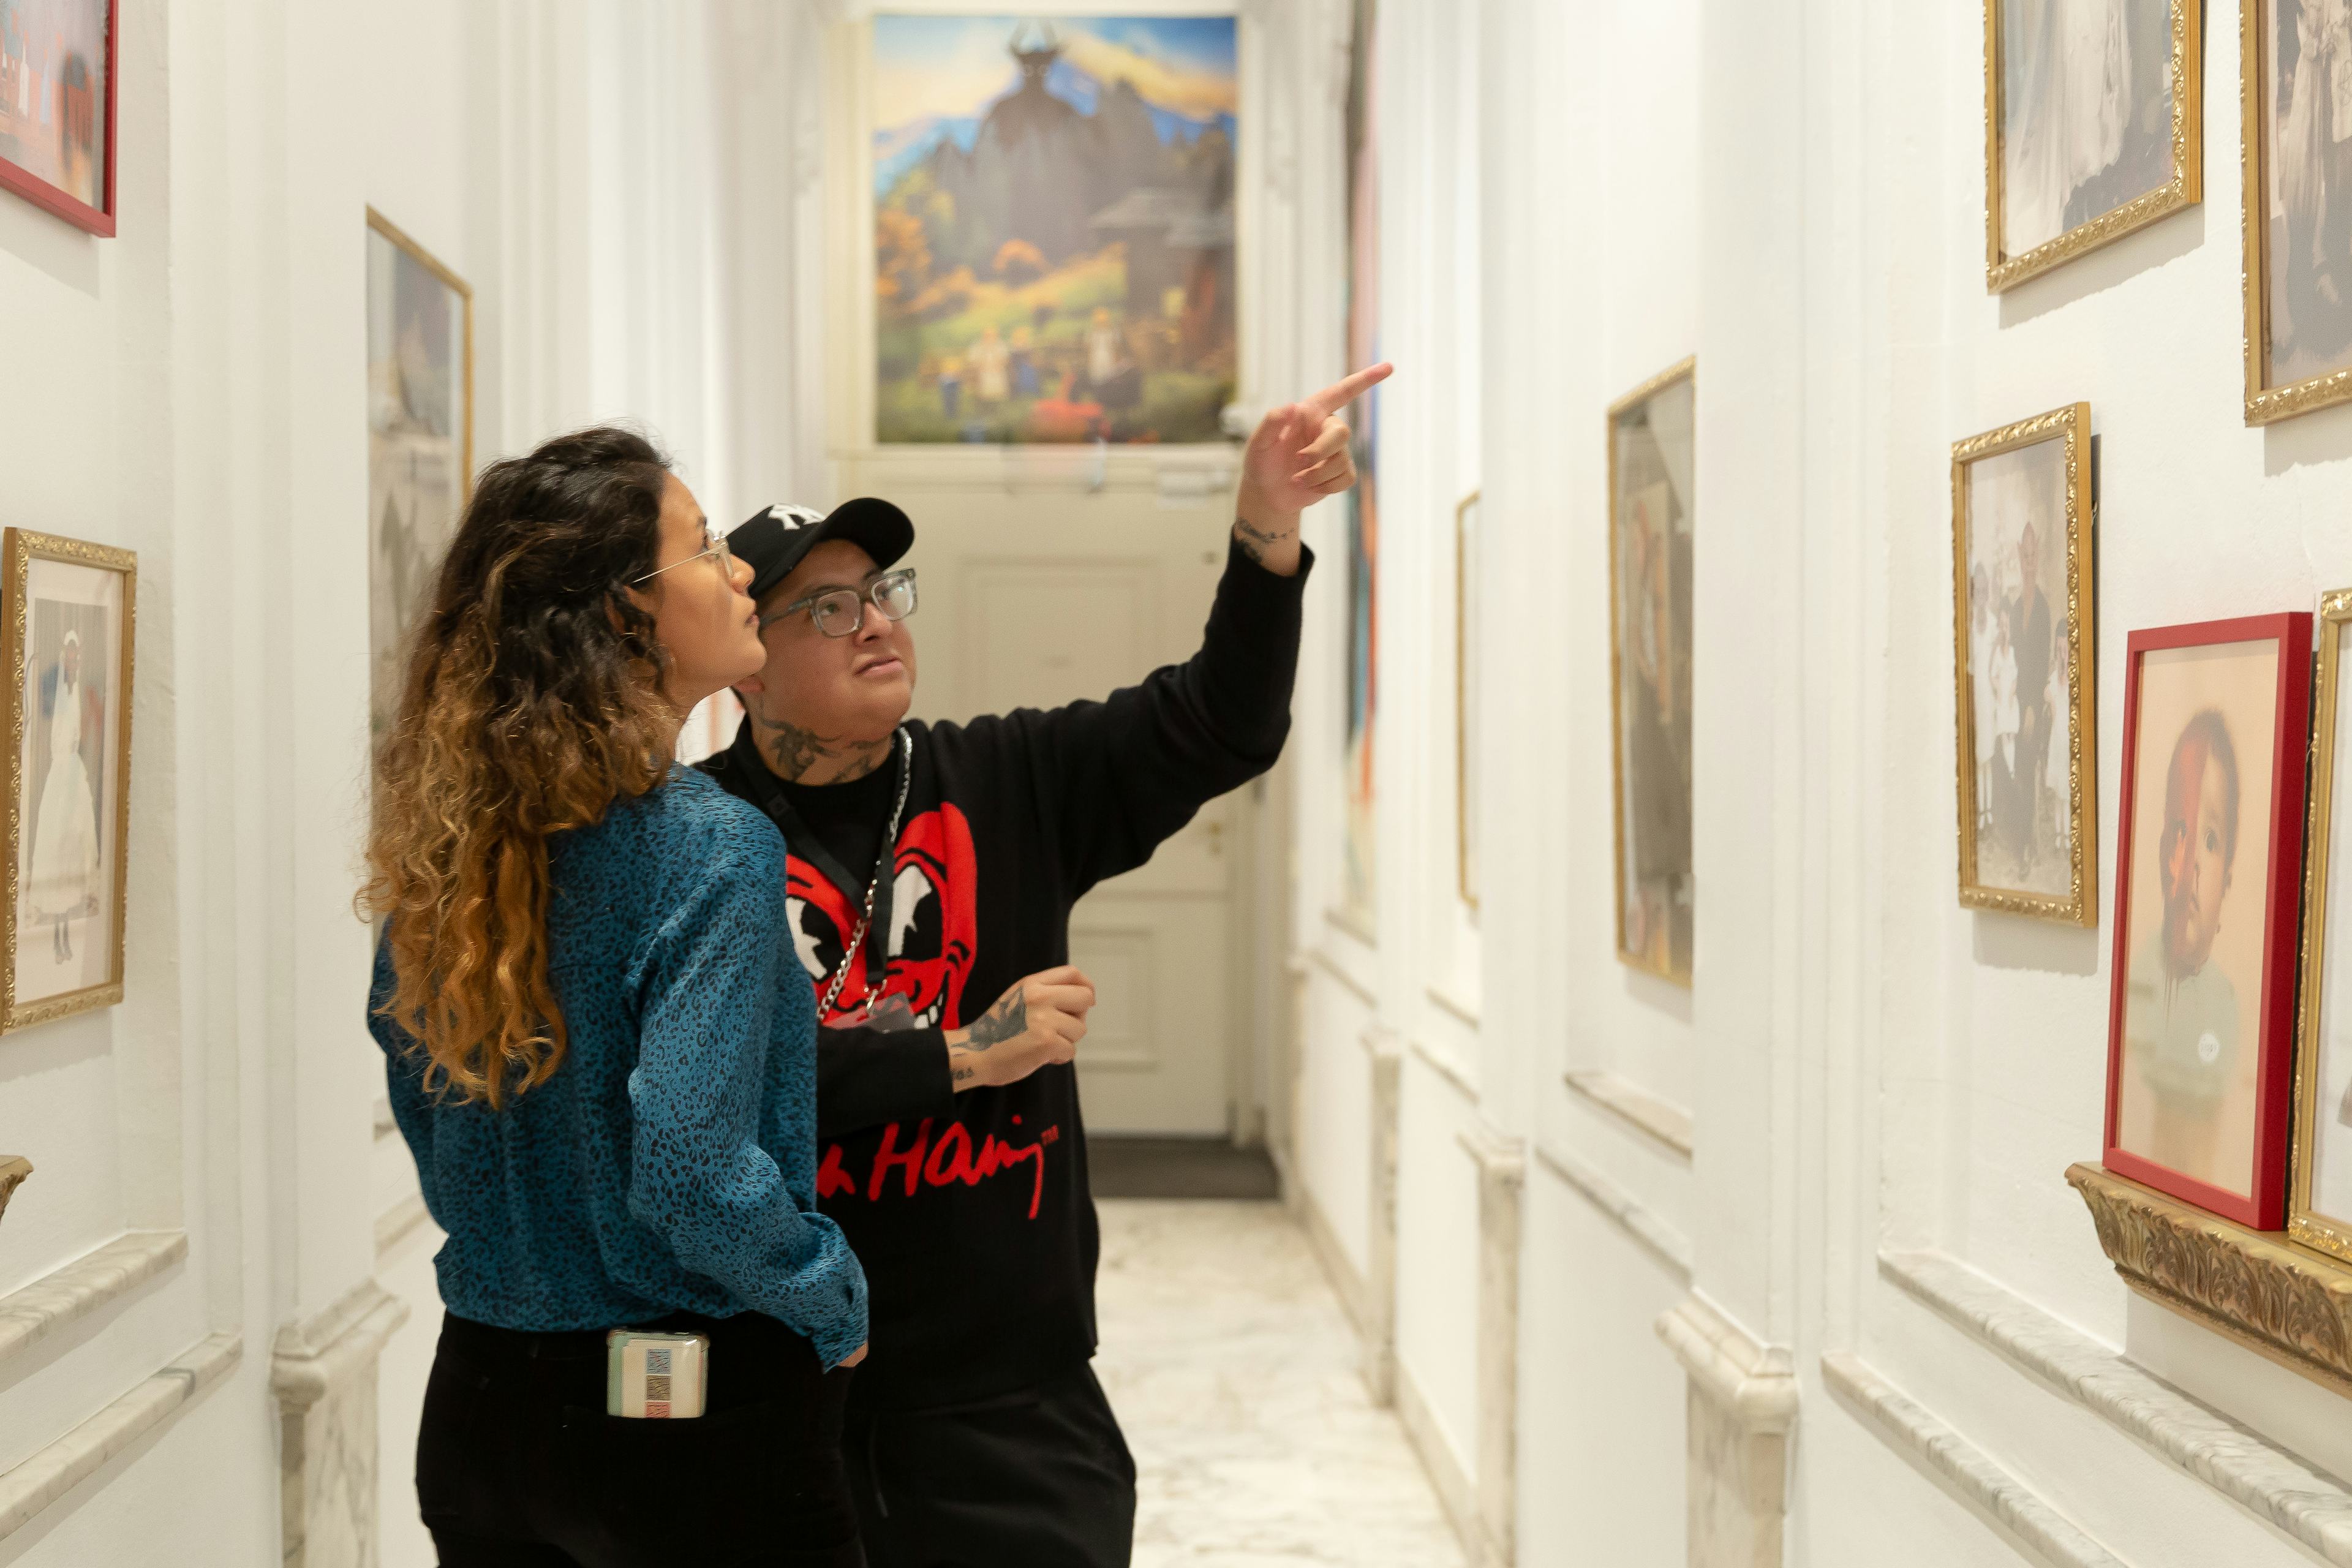 Two people looking at photos in a gallery space